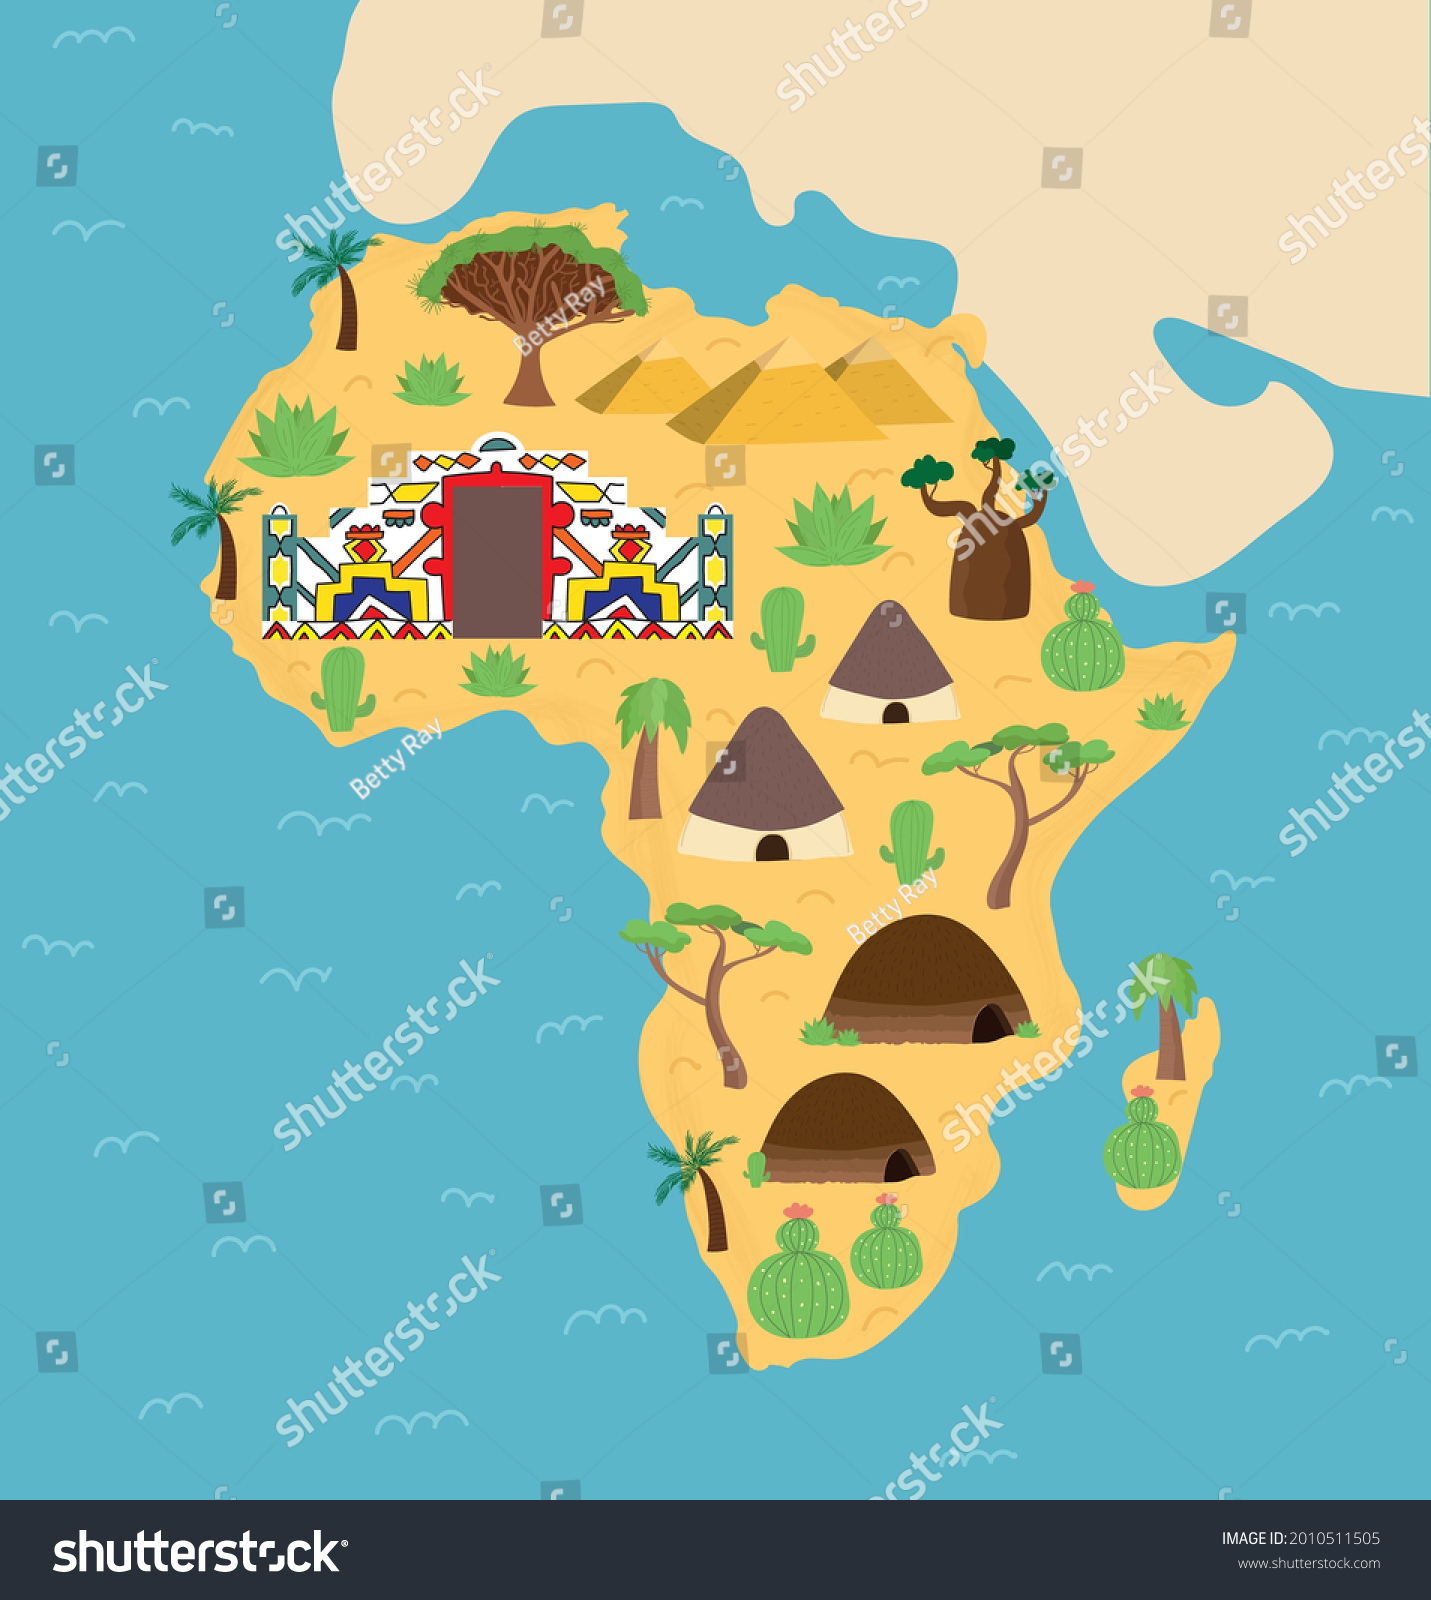 Cartoon Hand Drawn Illustrated Map Africa Stock Vector Royalty Free 2010511505 Shutterstock 5015